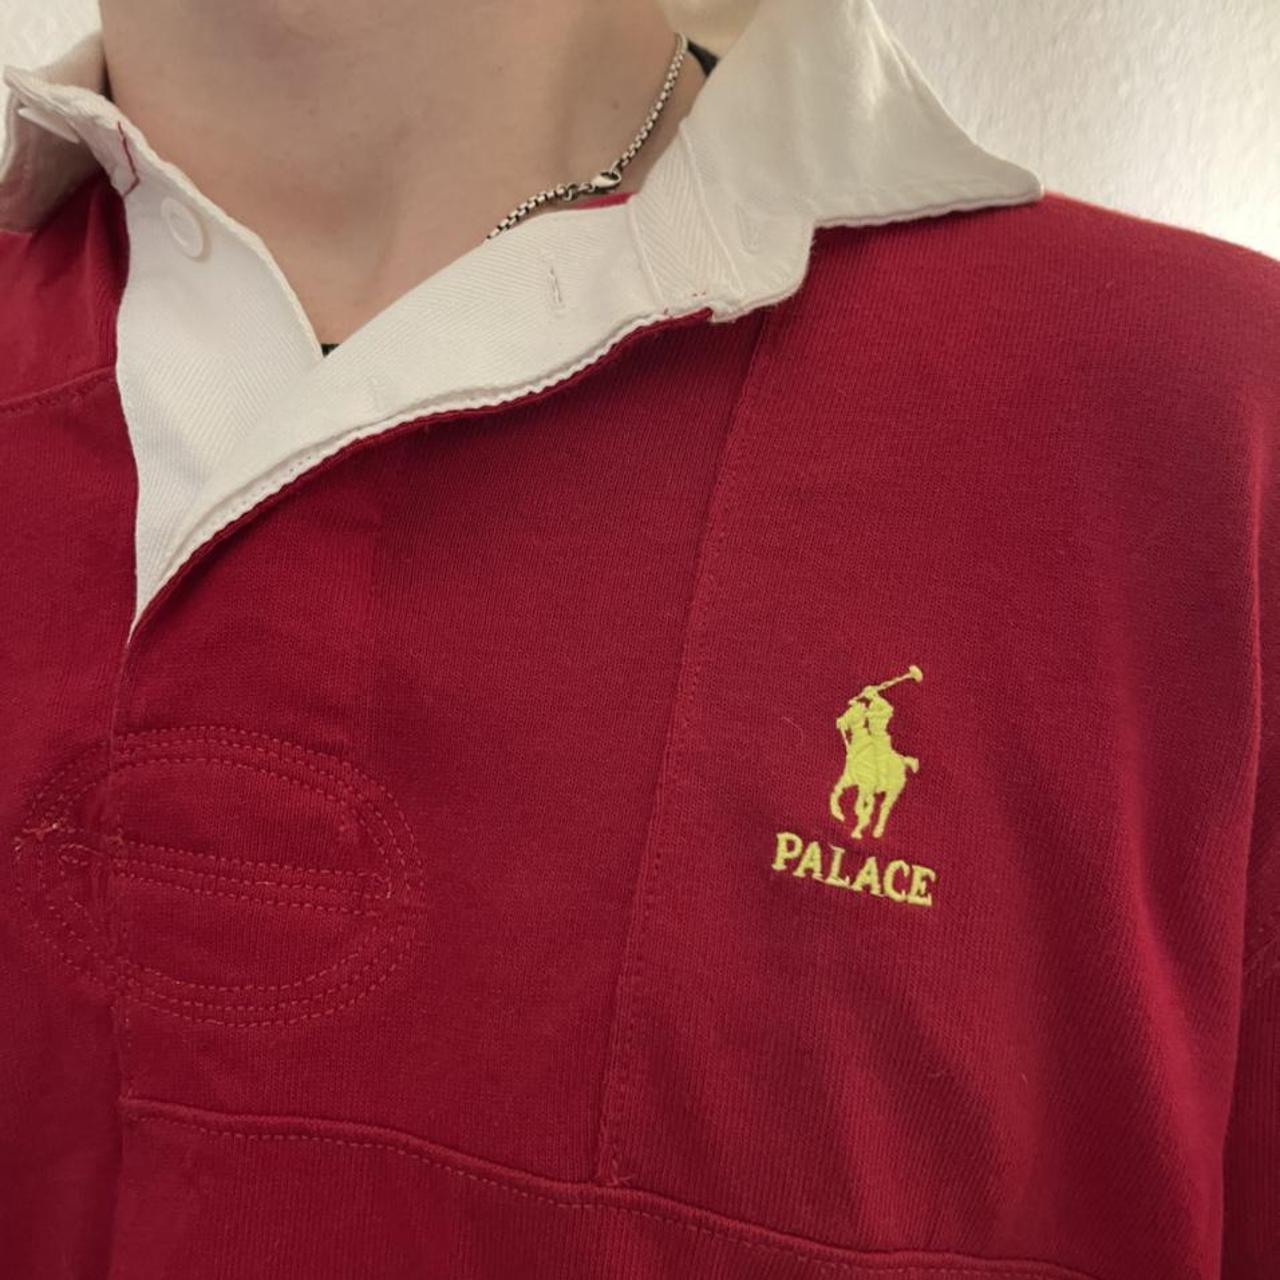 PALACE P2 Rugby shirt  Red